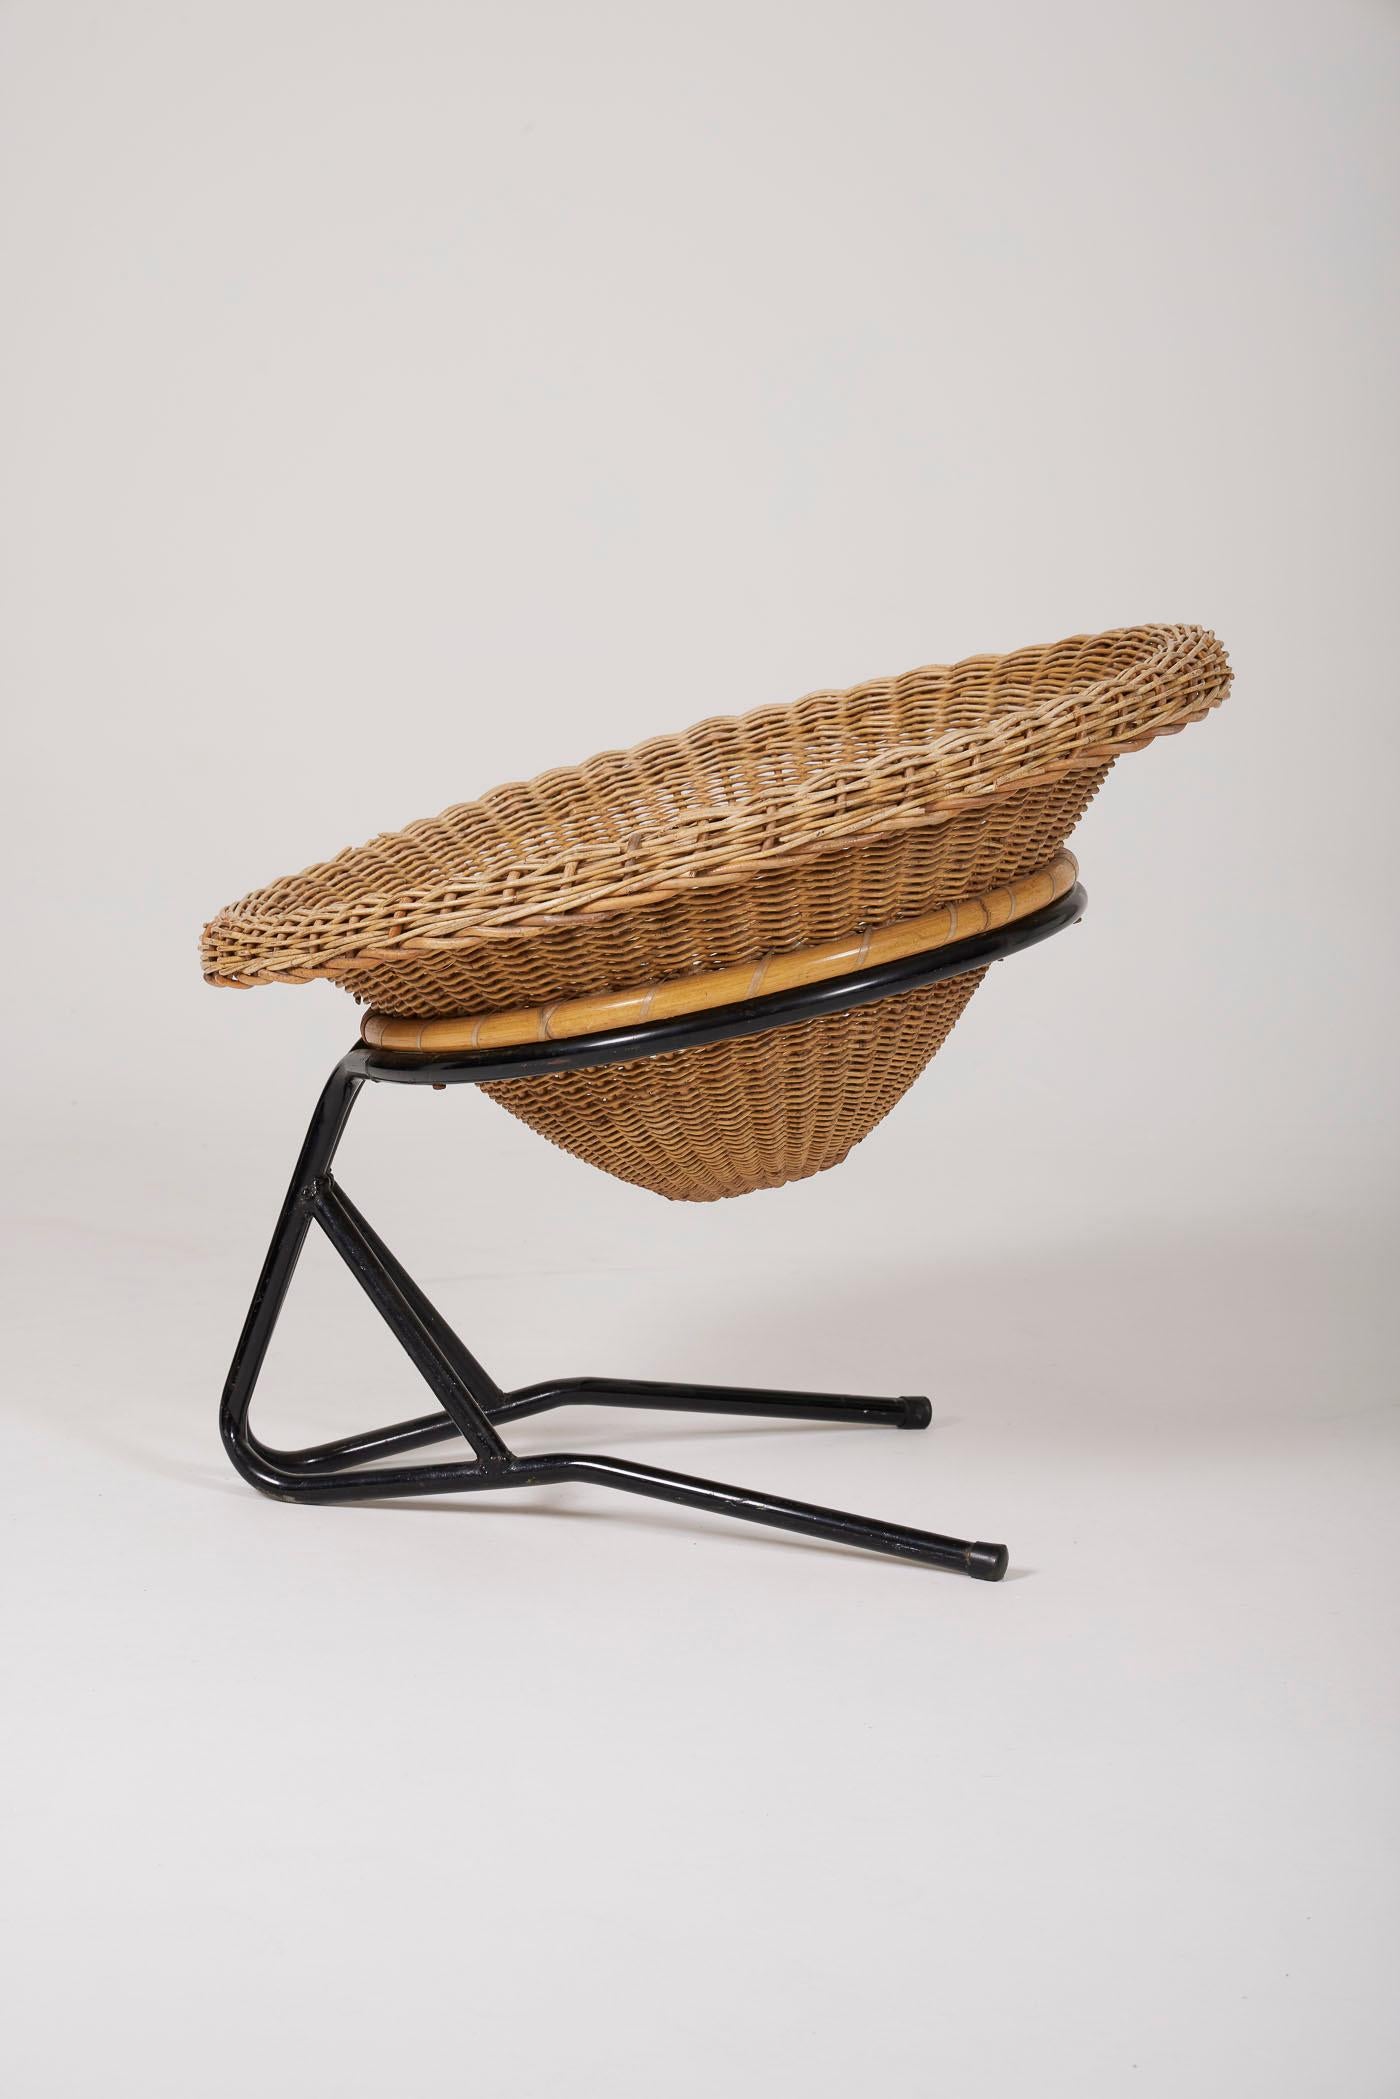 Armchair by Dutch designer Arnold Bueno de Mesquita for Rohe, from the 1960s. The tubular base is in black lacquered metal. The armchair is woven in rattan. Some rattan losses to report.
DV387